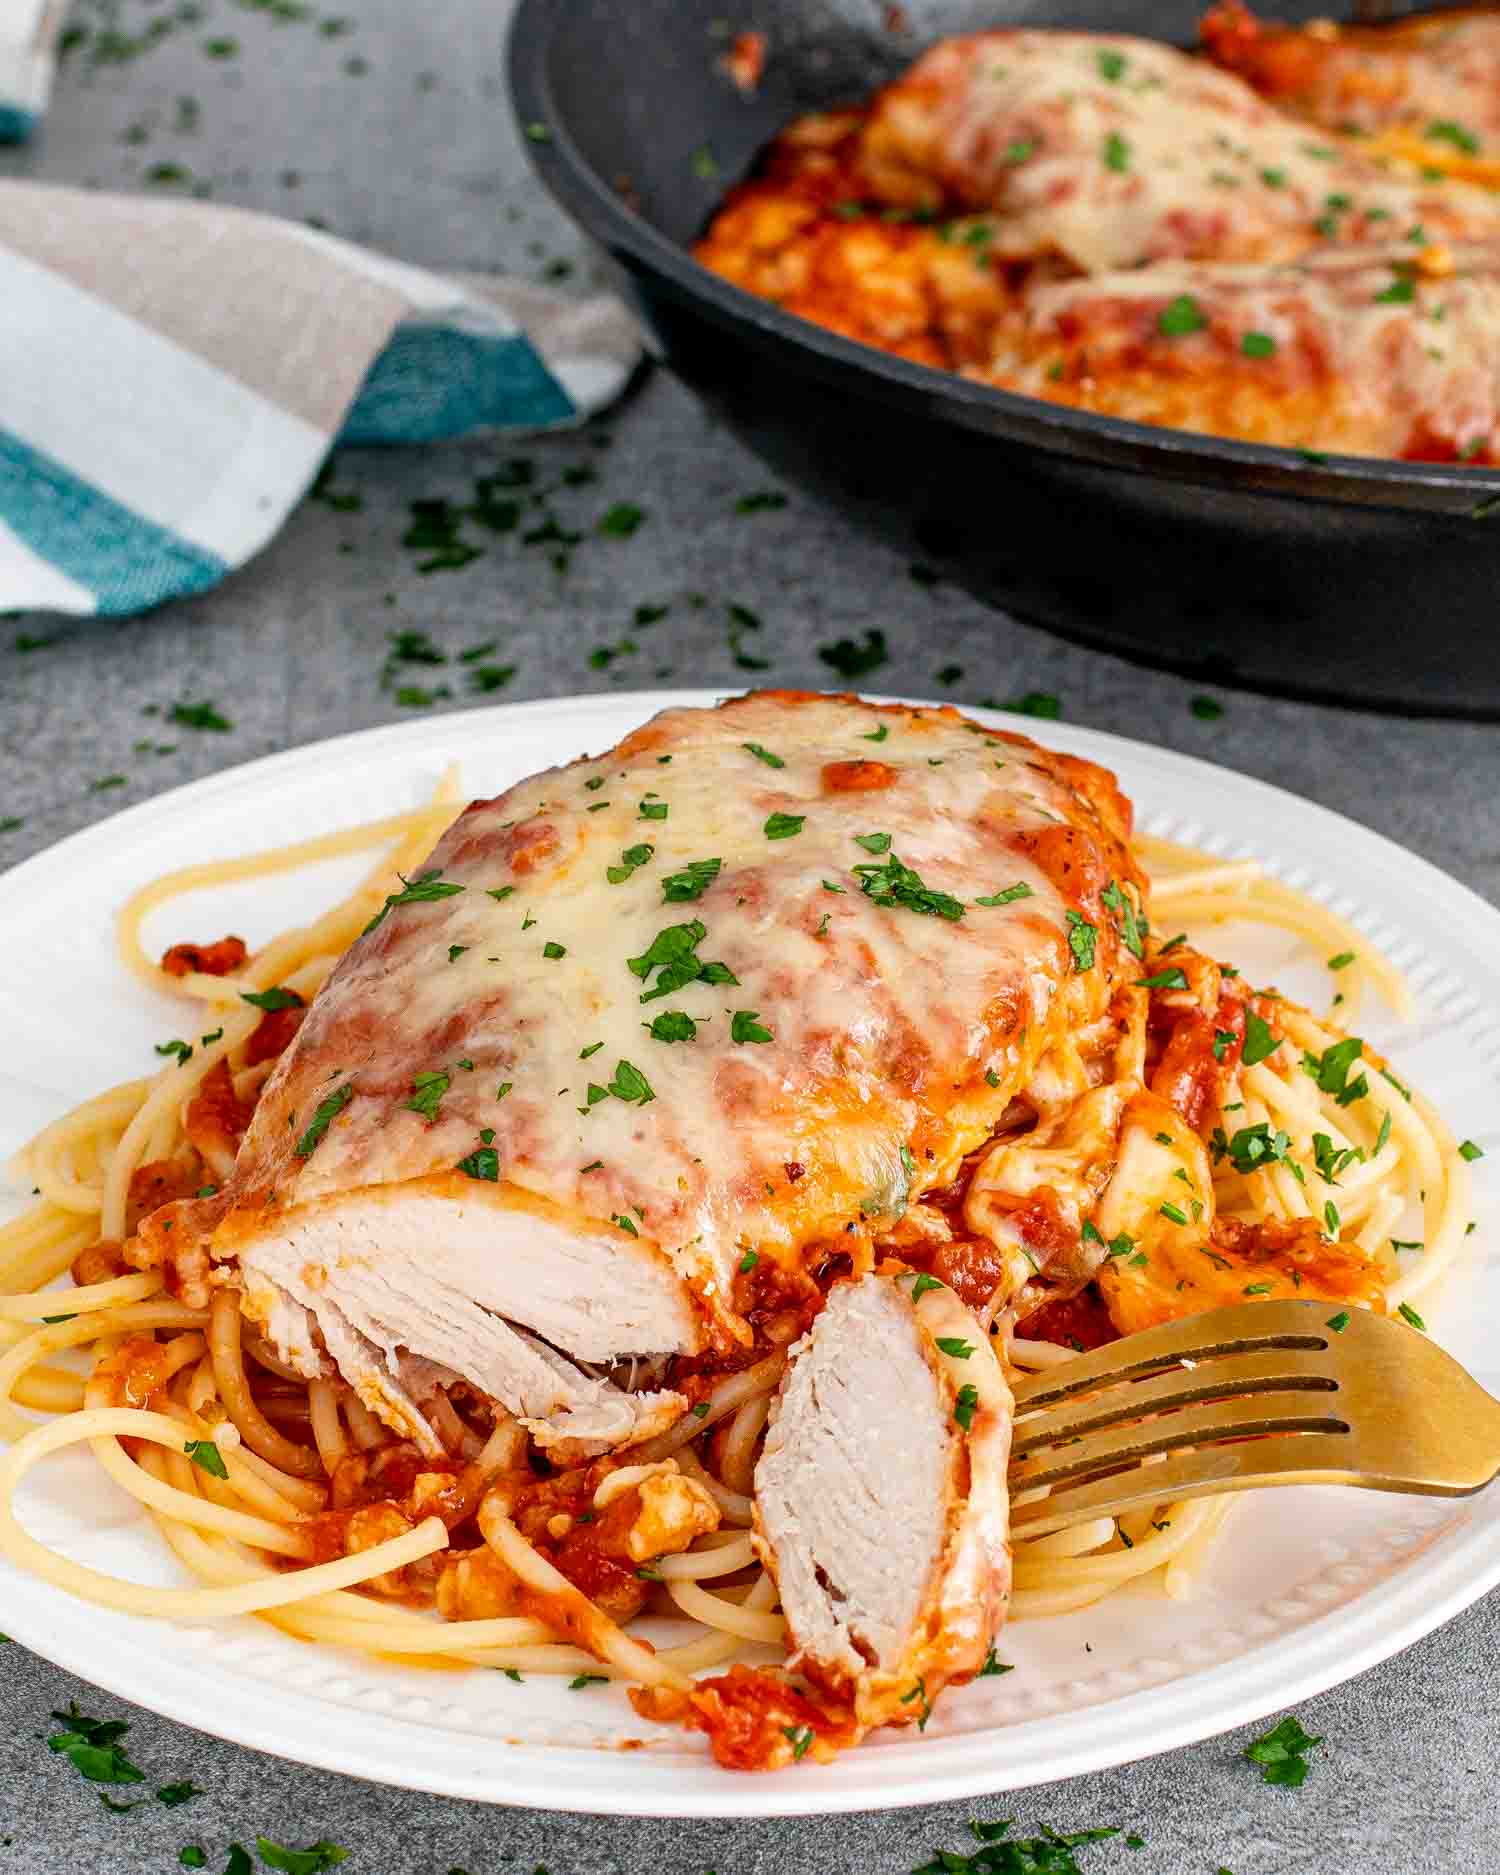 a chicken parmesan breast made in a skillet over a bed of spaghetti garnished with parsley.